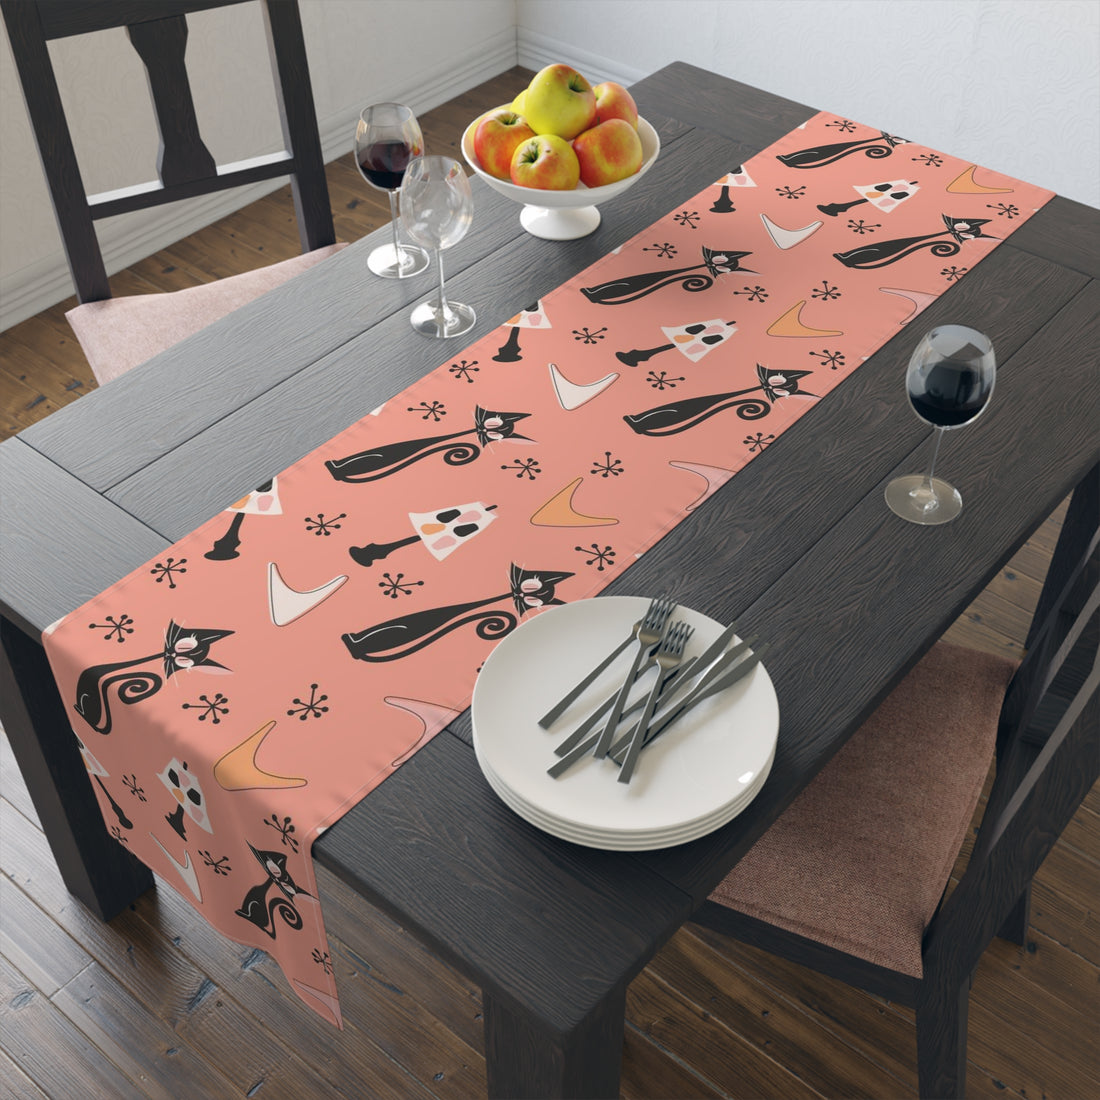 Atomic Cat Table Runner, Coral, Black White Kitties, Boomerang Pattern With Quirky Lamps, Mid Century Modern Table Decor